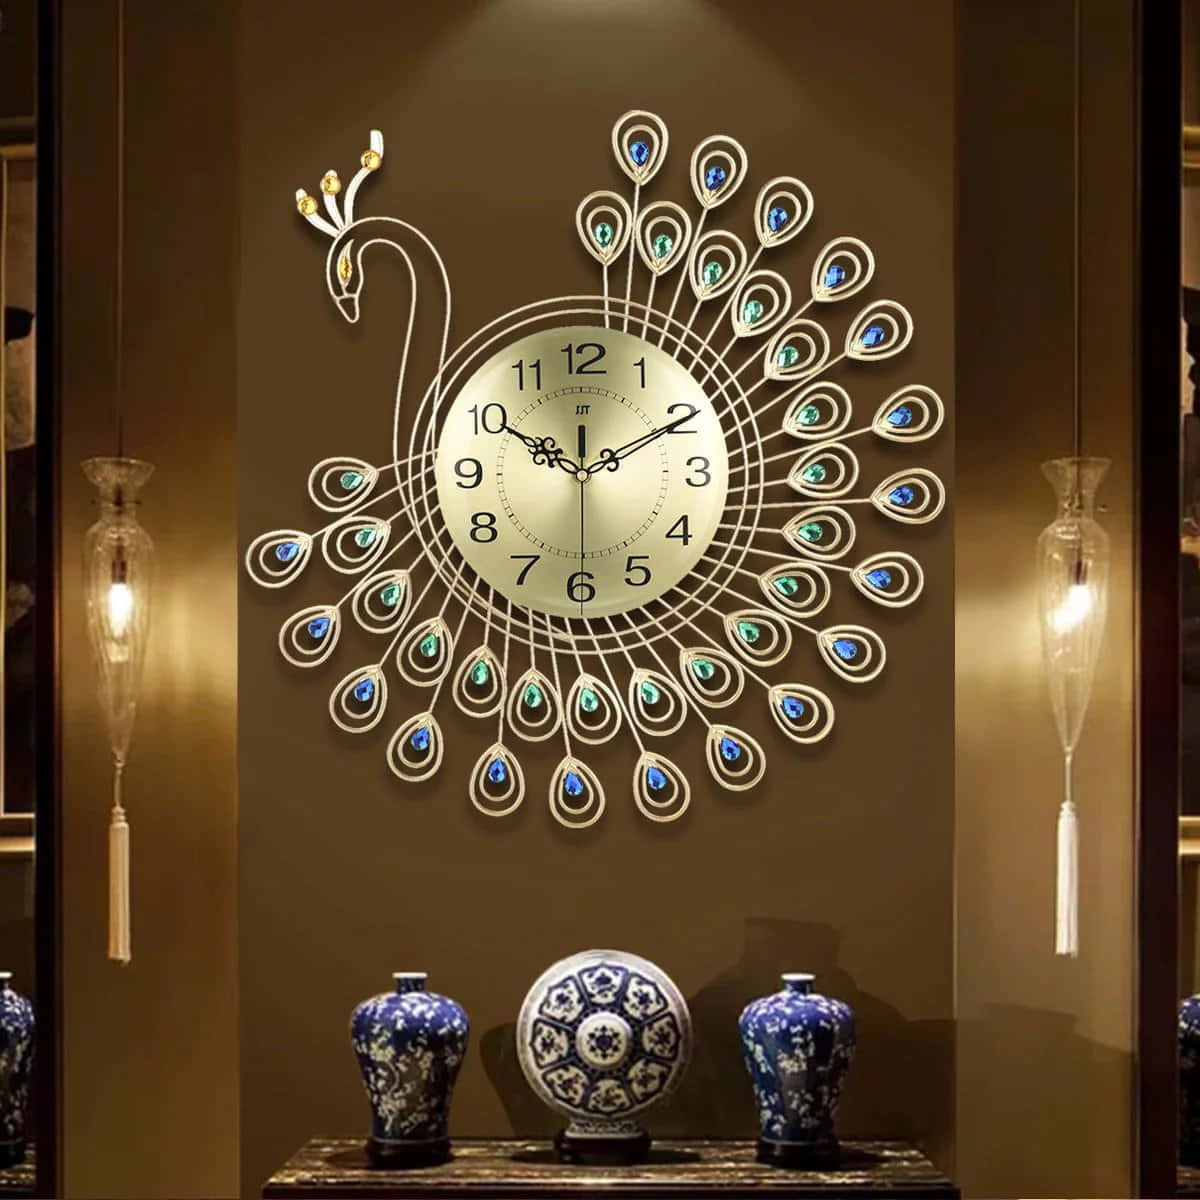 A Large Wall Clock With A Peacock Design